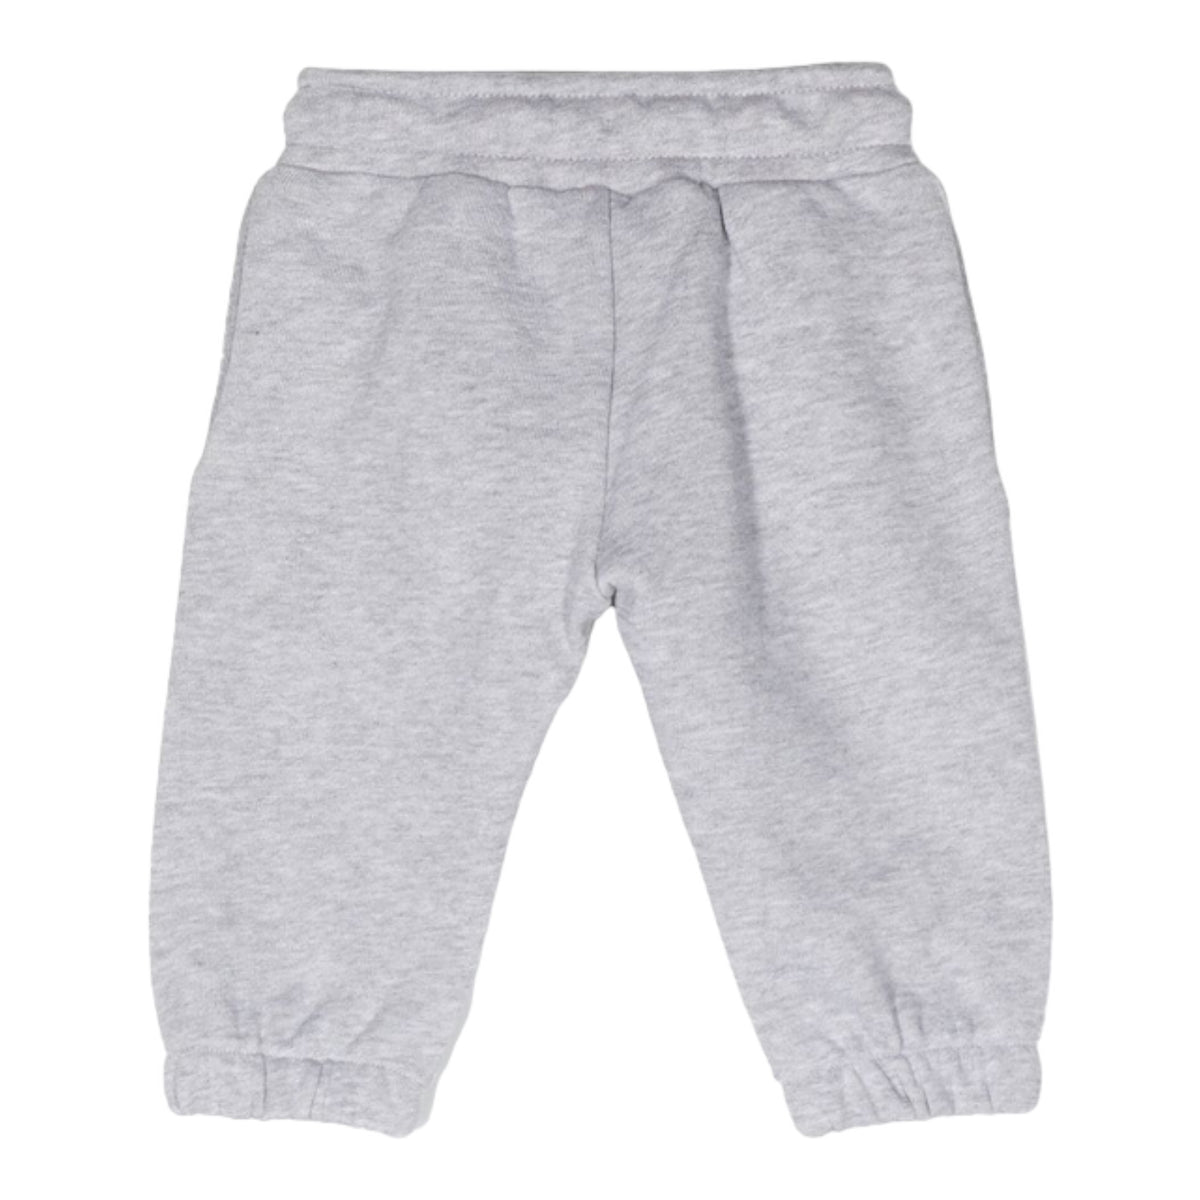 Kenzo Kids Toddler's Embroidered Logo Sweatpants